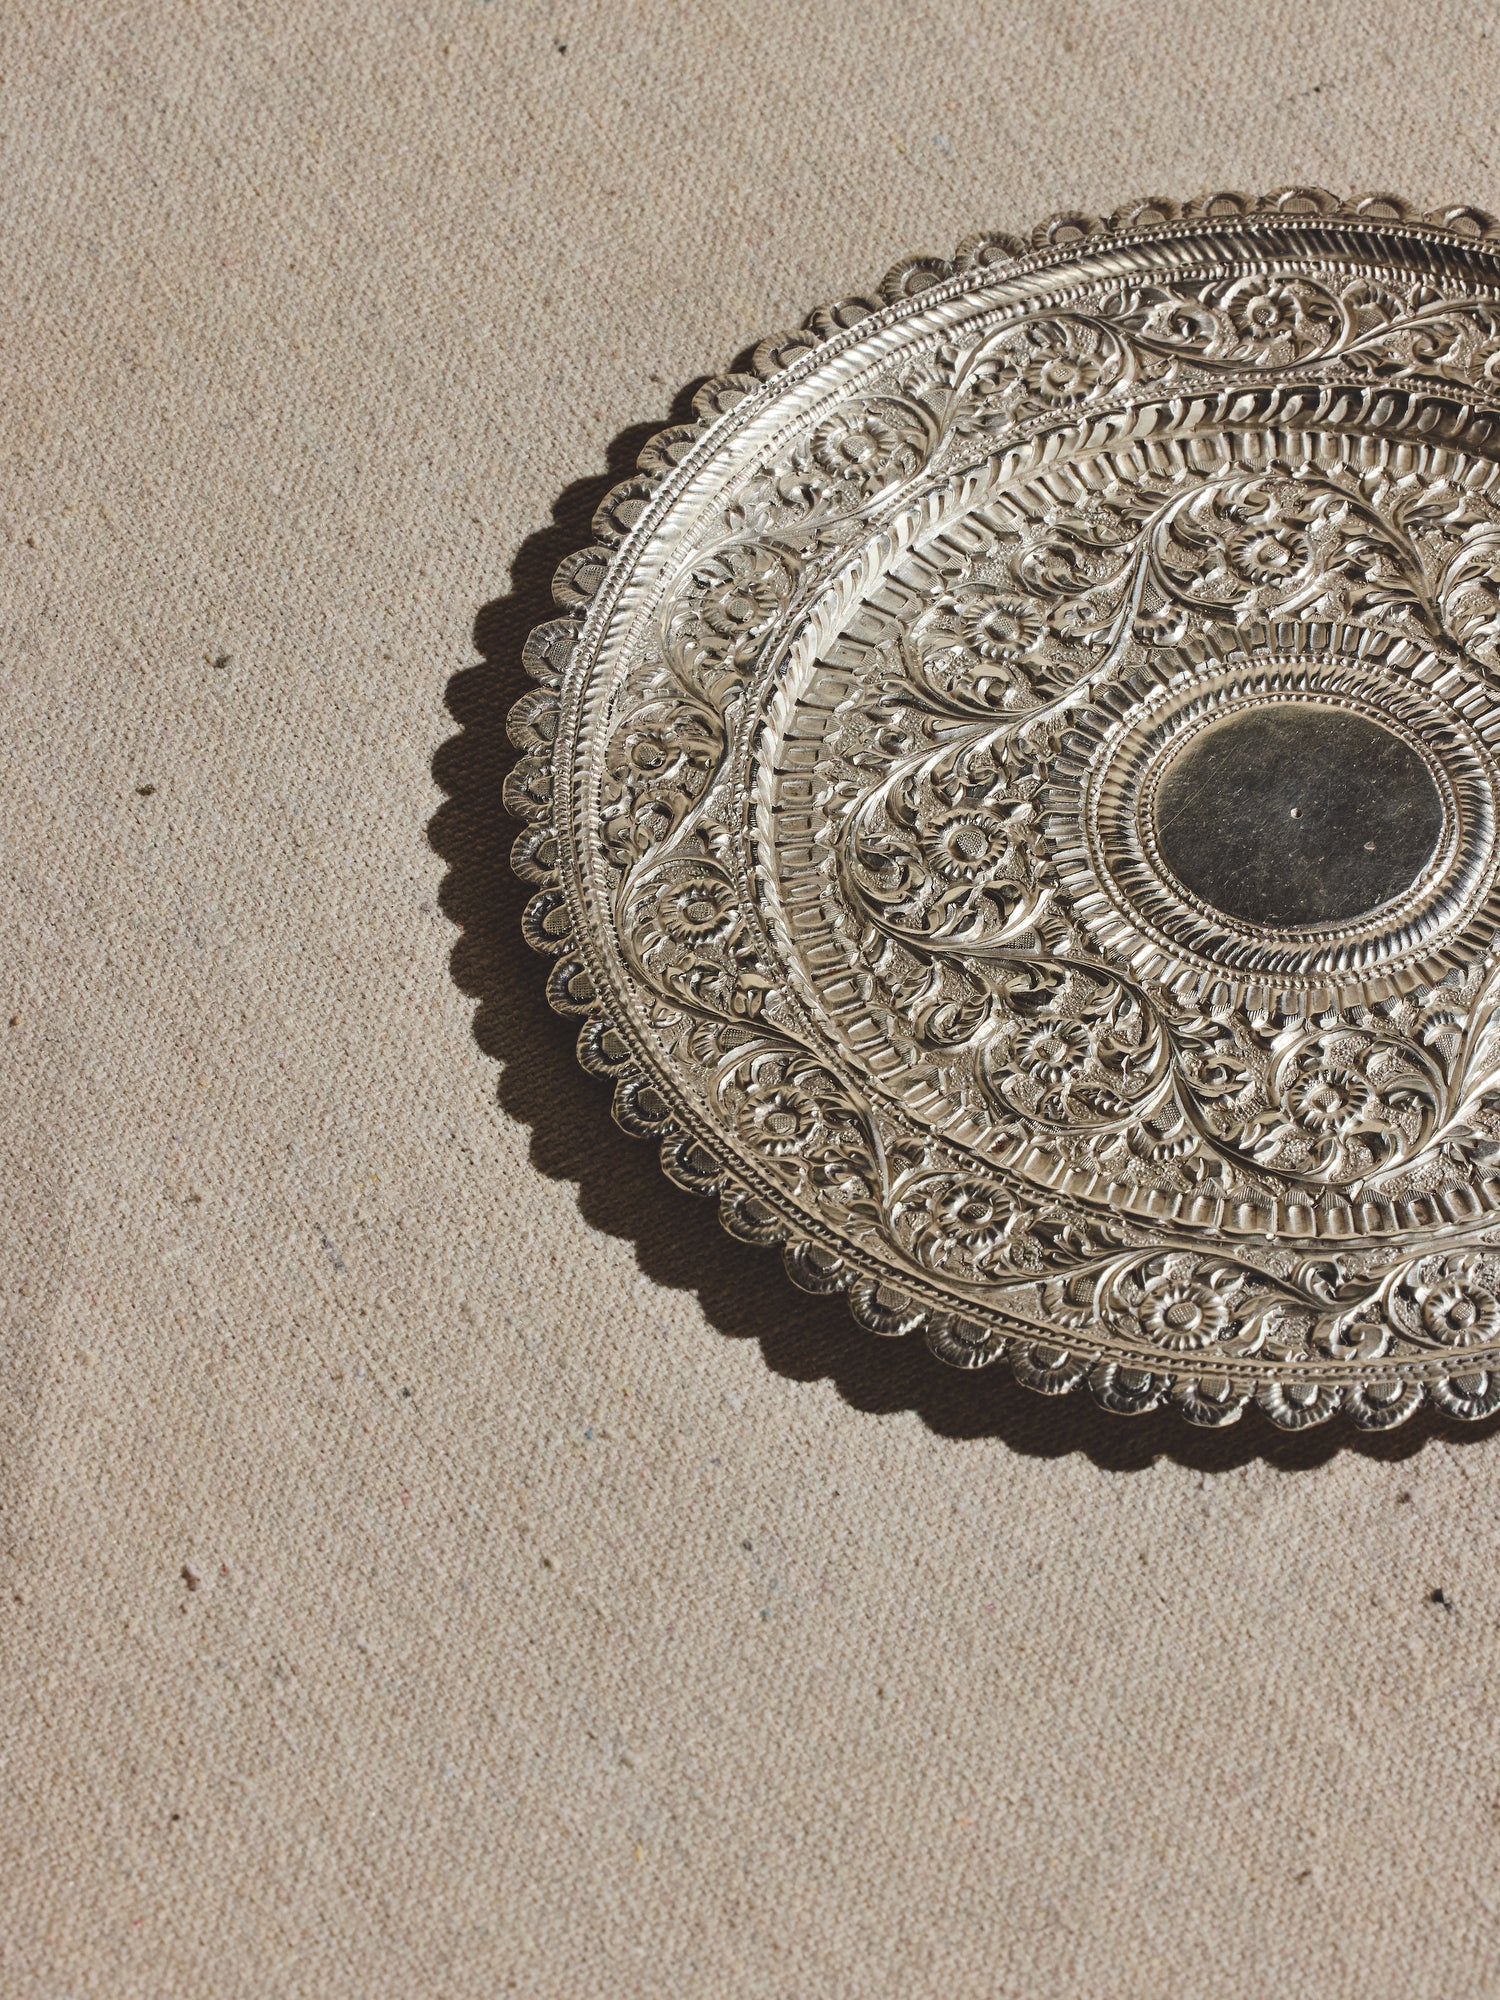 Anglo Indian hammered silver plate chased with floral designs and adorned with a decorative edge of petal-like depressions.